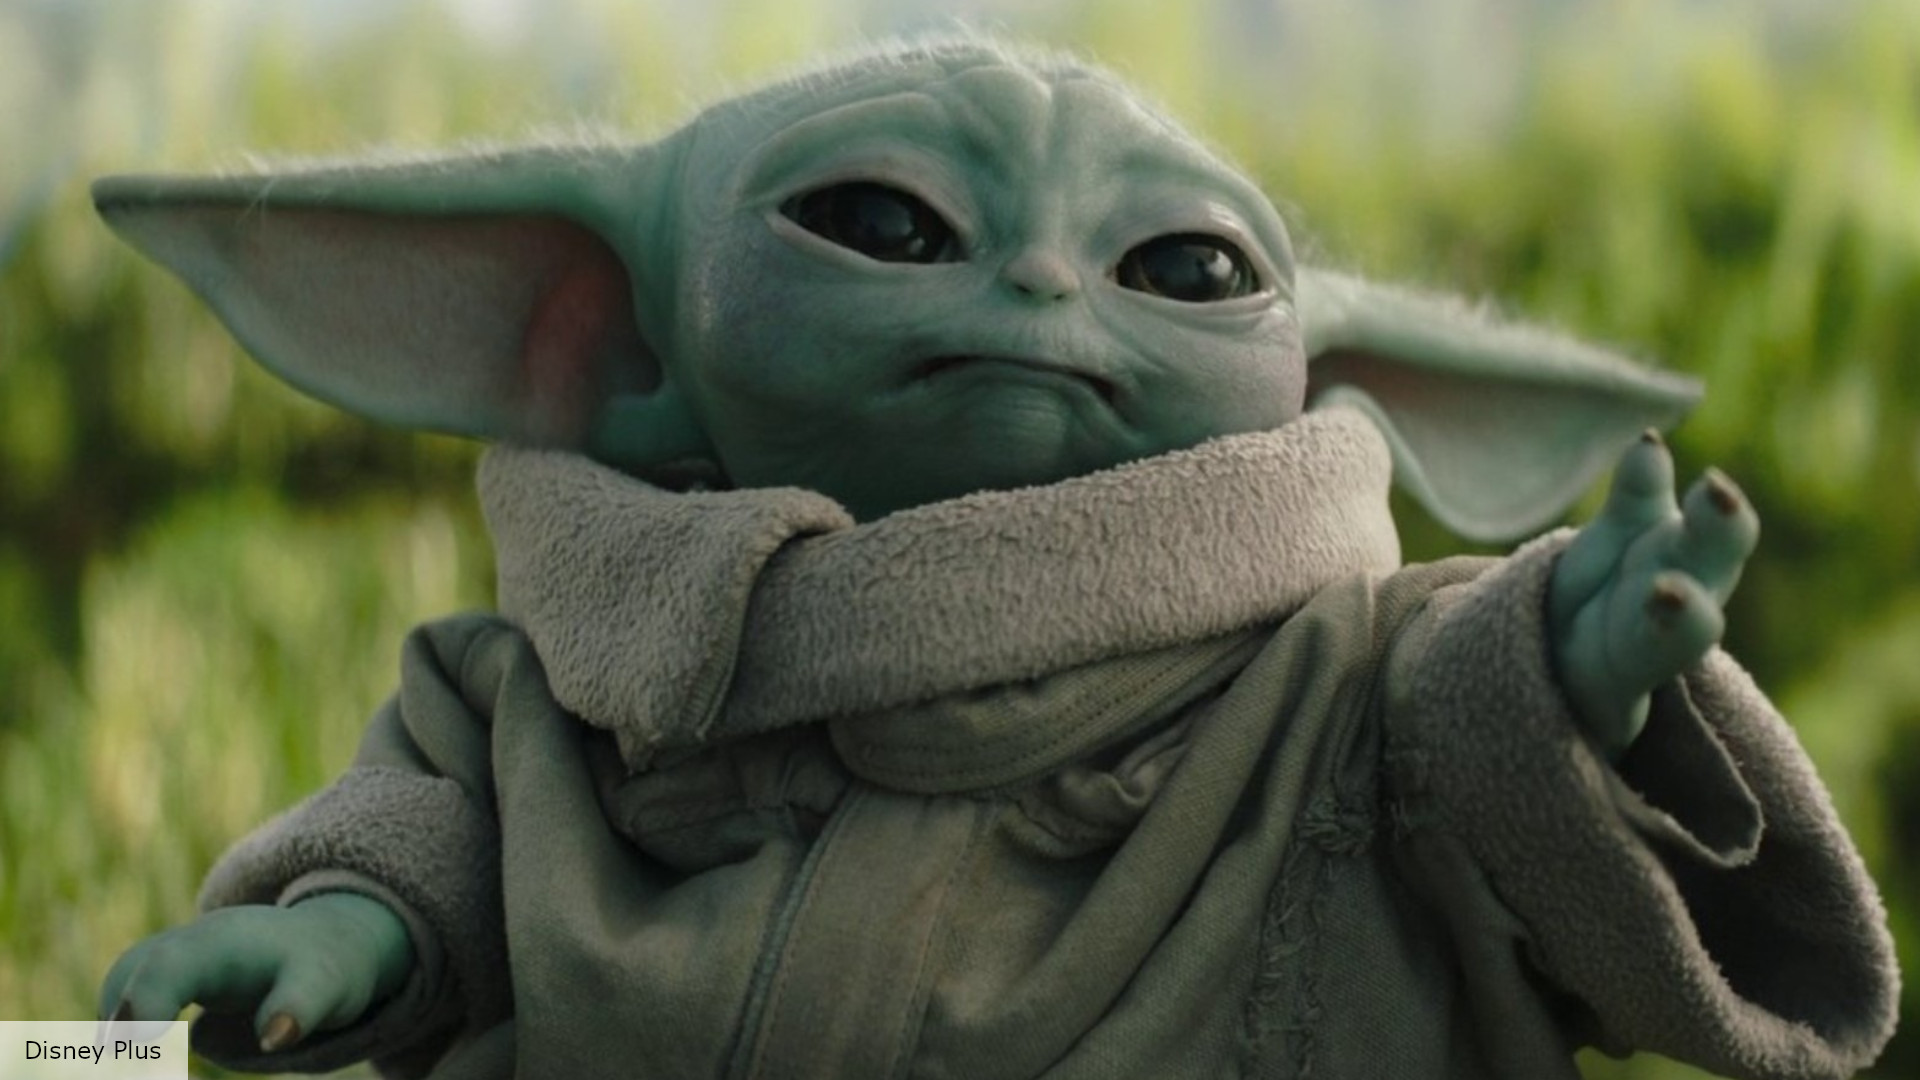 What is Baby Yoda?